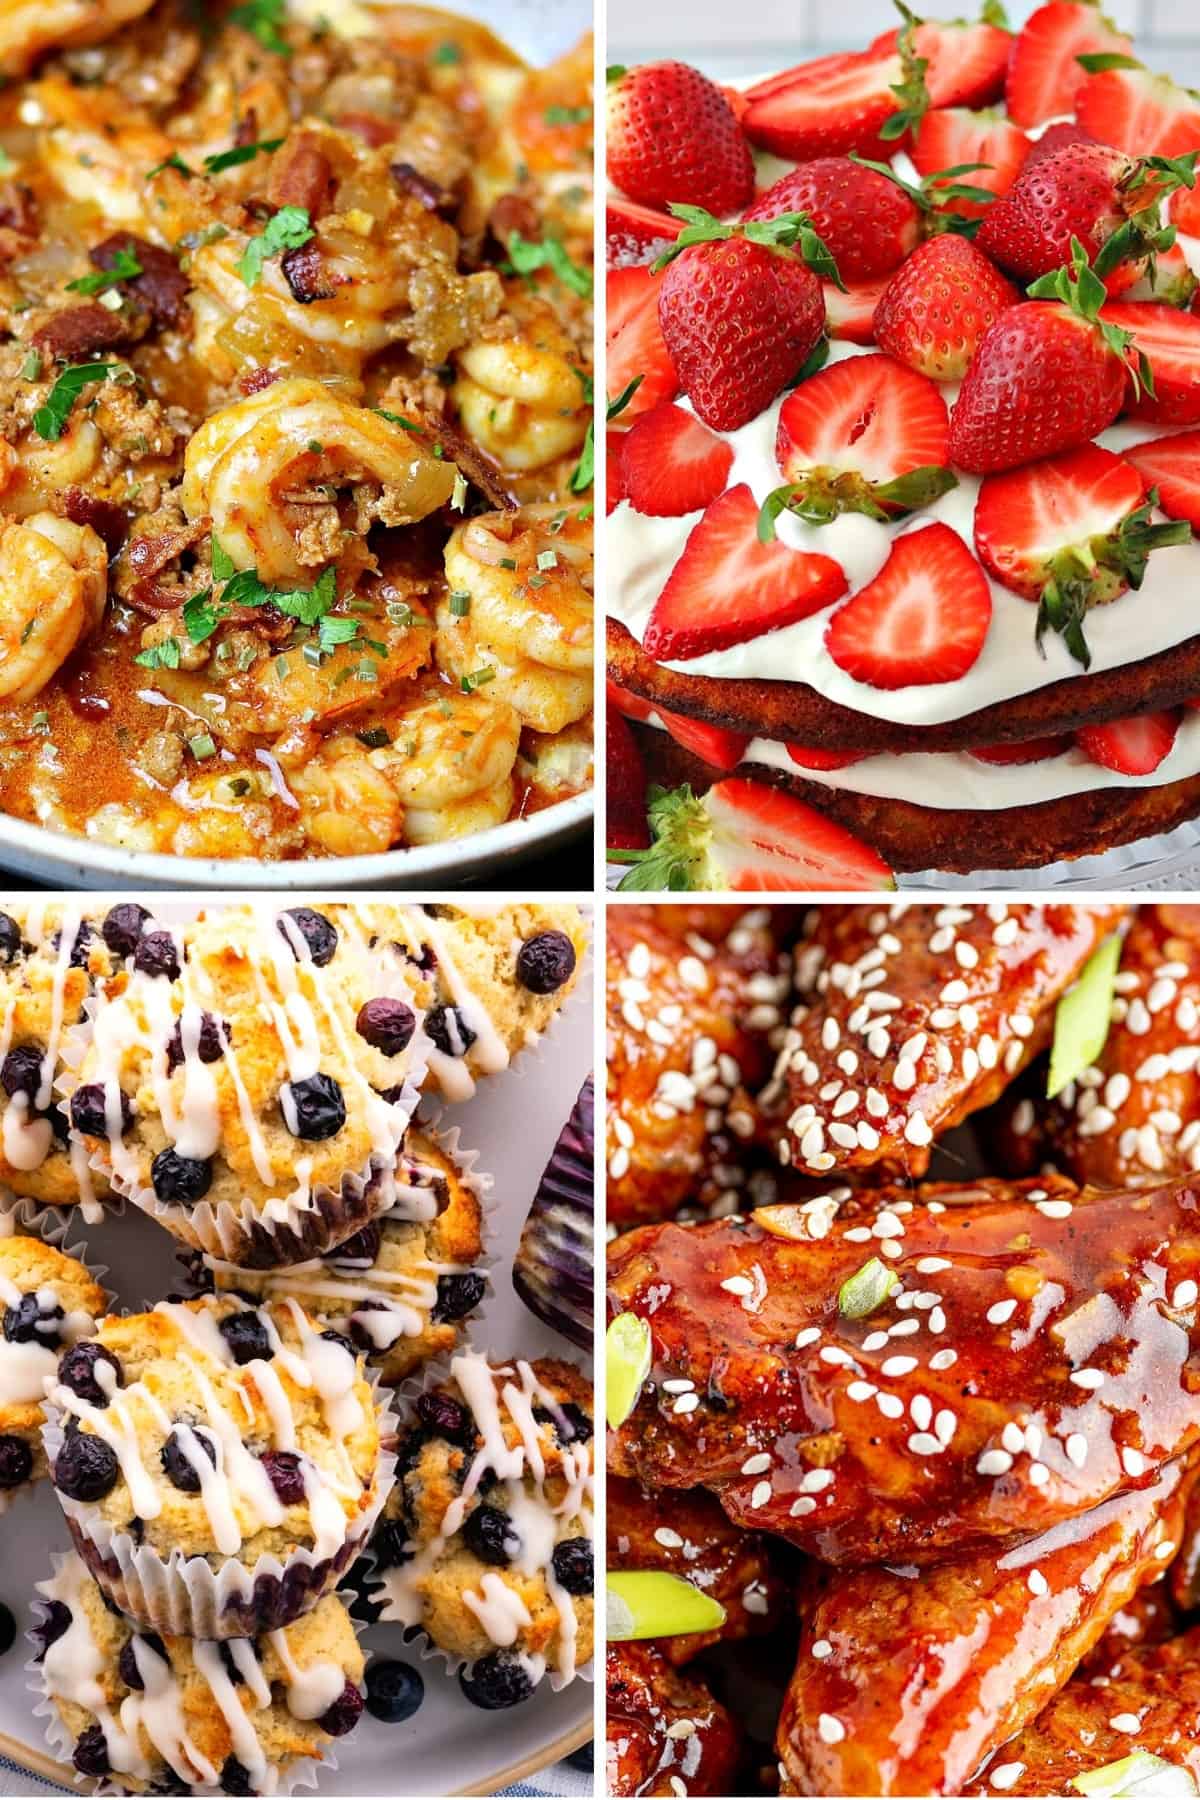 Xanthan Gum recipes like keto shrimp and grits, low carb strawberry shortcake, keto blueberry muffins, and sweet chili wings